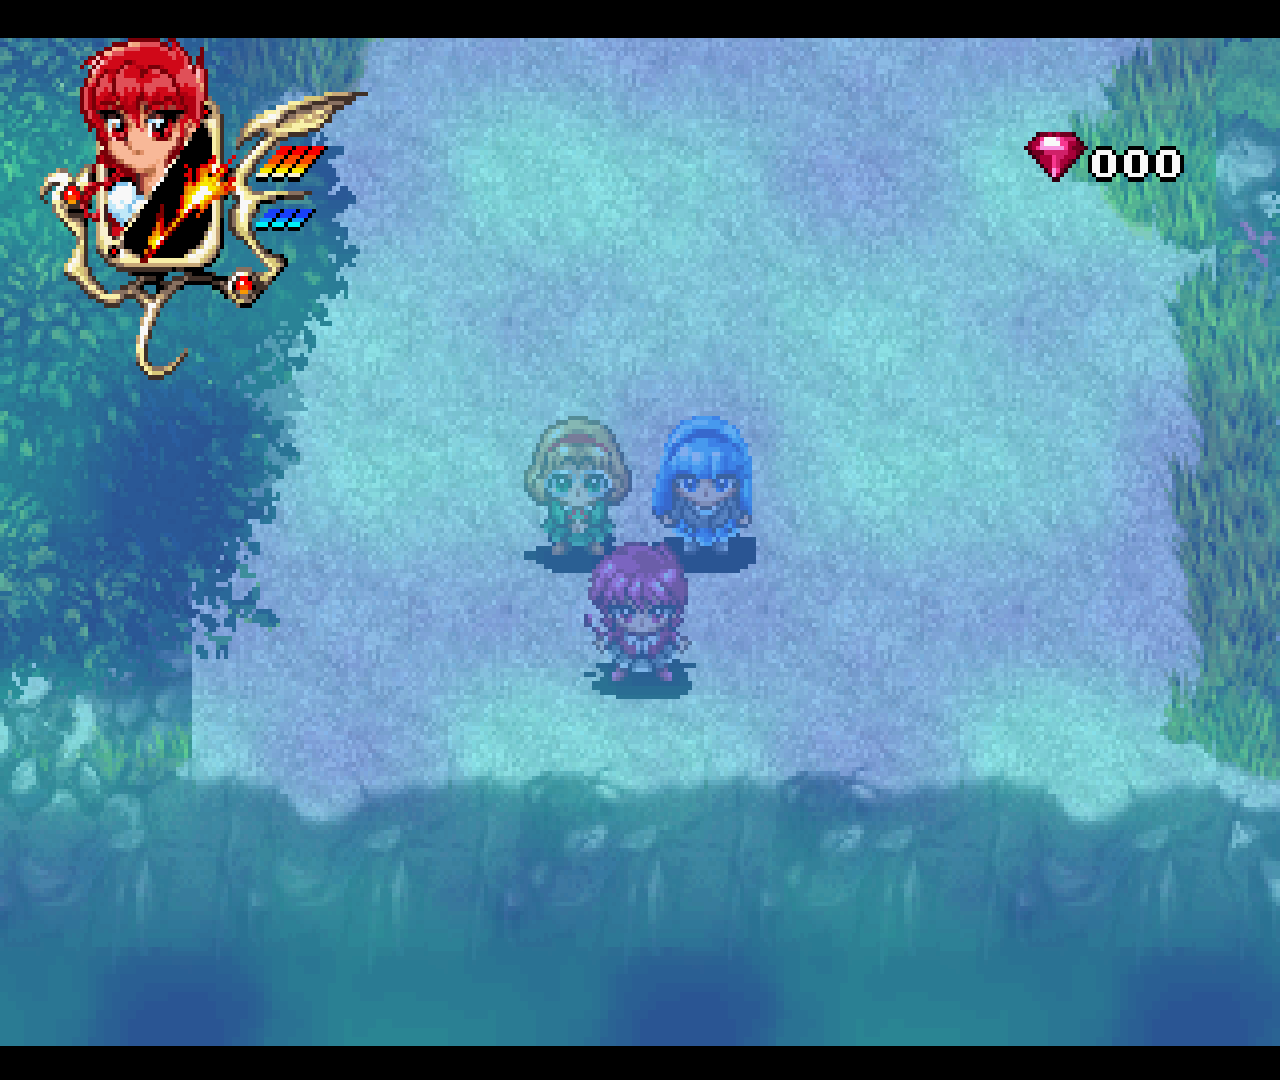 Figure 4 - The three main characters of Magic Knight Rayearth, starting off on their adventure